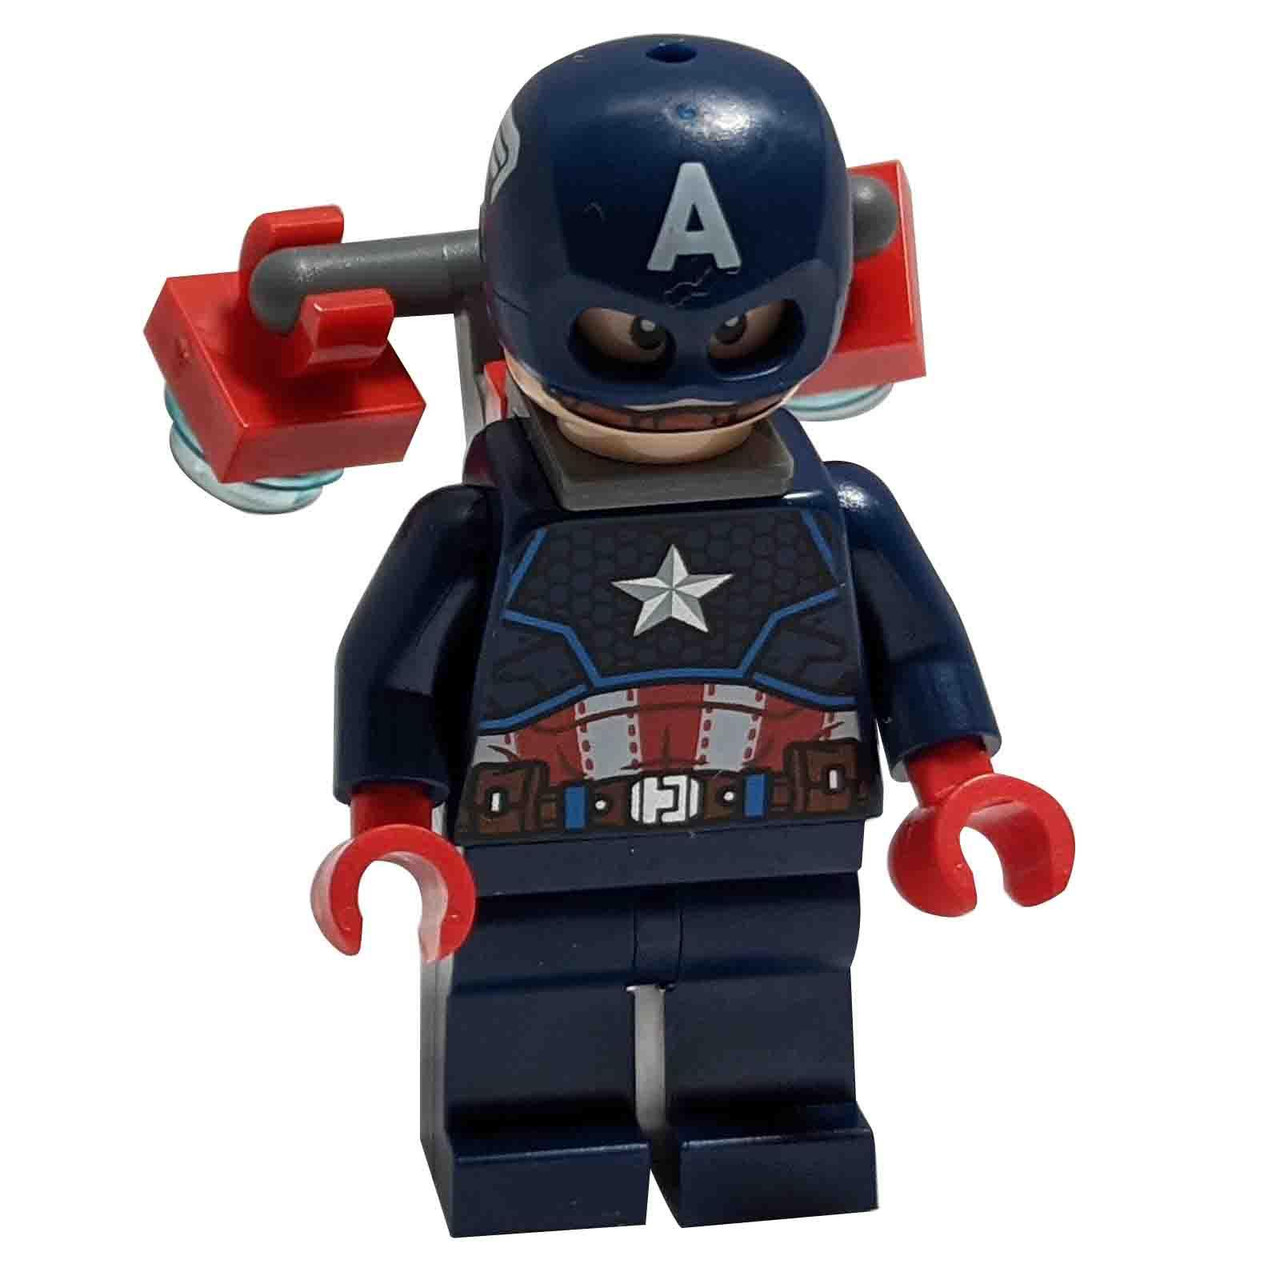 LEGO Superheroes: Captain America Minifig with Jetpack and Tesseract